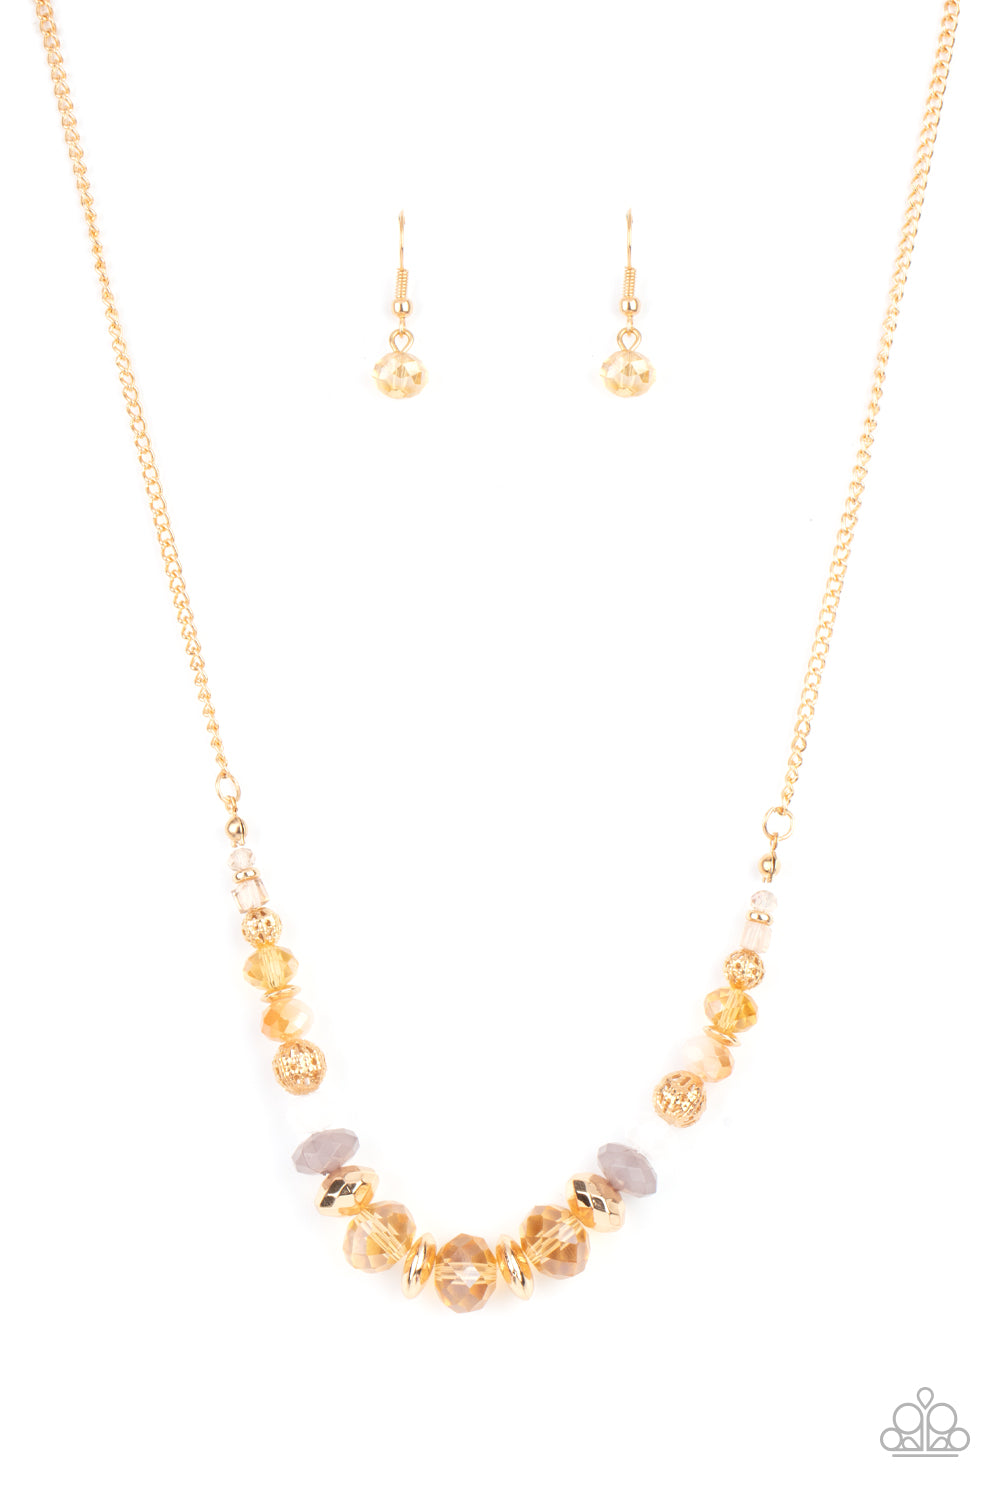 Turn Up The Tea Lights Gold Necklace - Paparazzi Accessories  Varying in opacity, an enchanting collection of iridescent and crystal-like beads are threaded along an invisible wire that is attached to a gold chain below the collar. Mismatched gold beads and ornate gold accents are sprinkled between the glittery compilation, adding a whimsy sheen to the colorful statement piece. Features an adjustable clasp closure.  Sold as one individual necklace. Includes one pair of matching earrings.